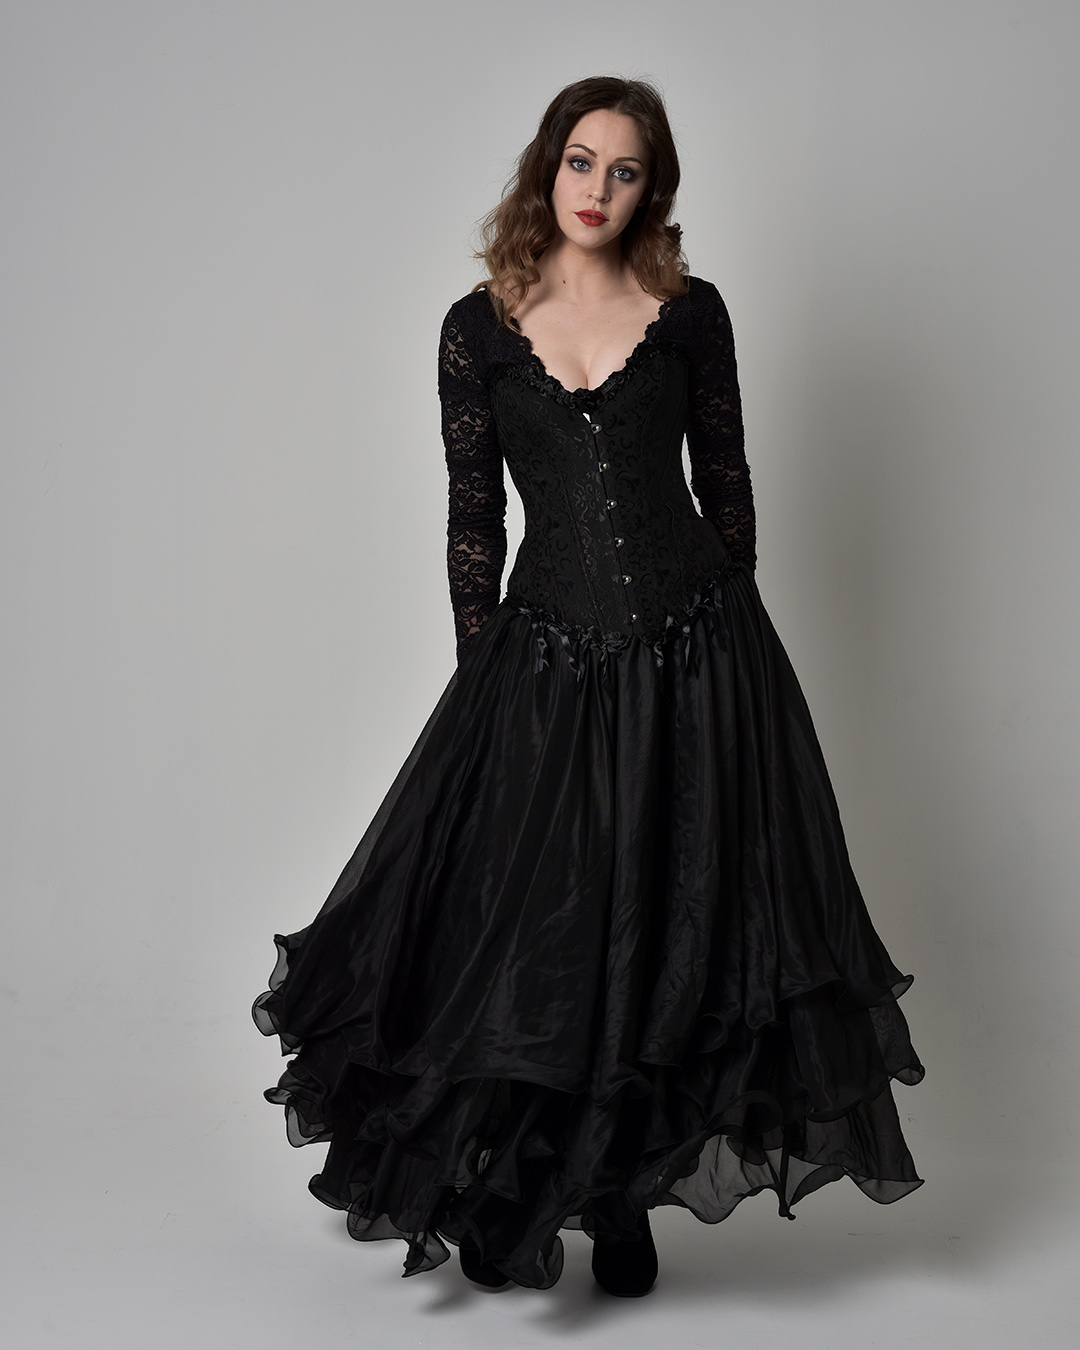 gothic wedding dresses with long sleeves lace corset shutterstock